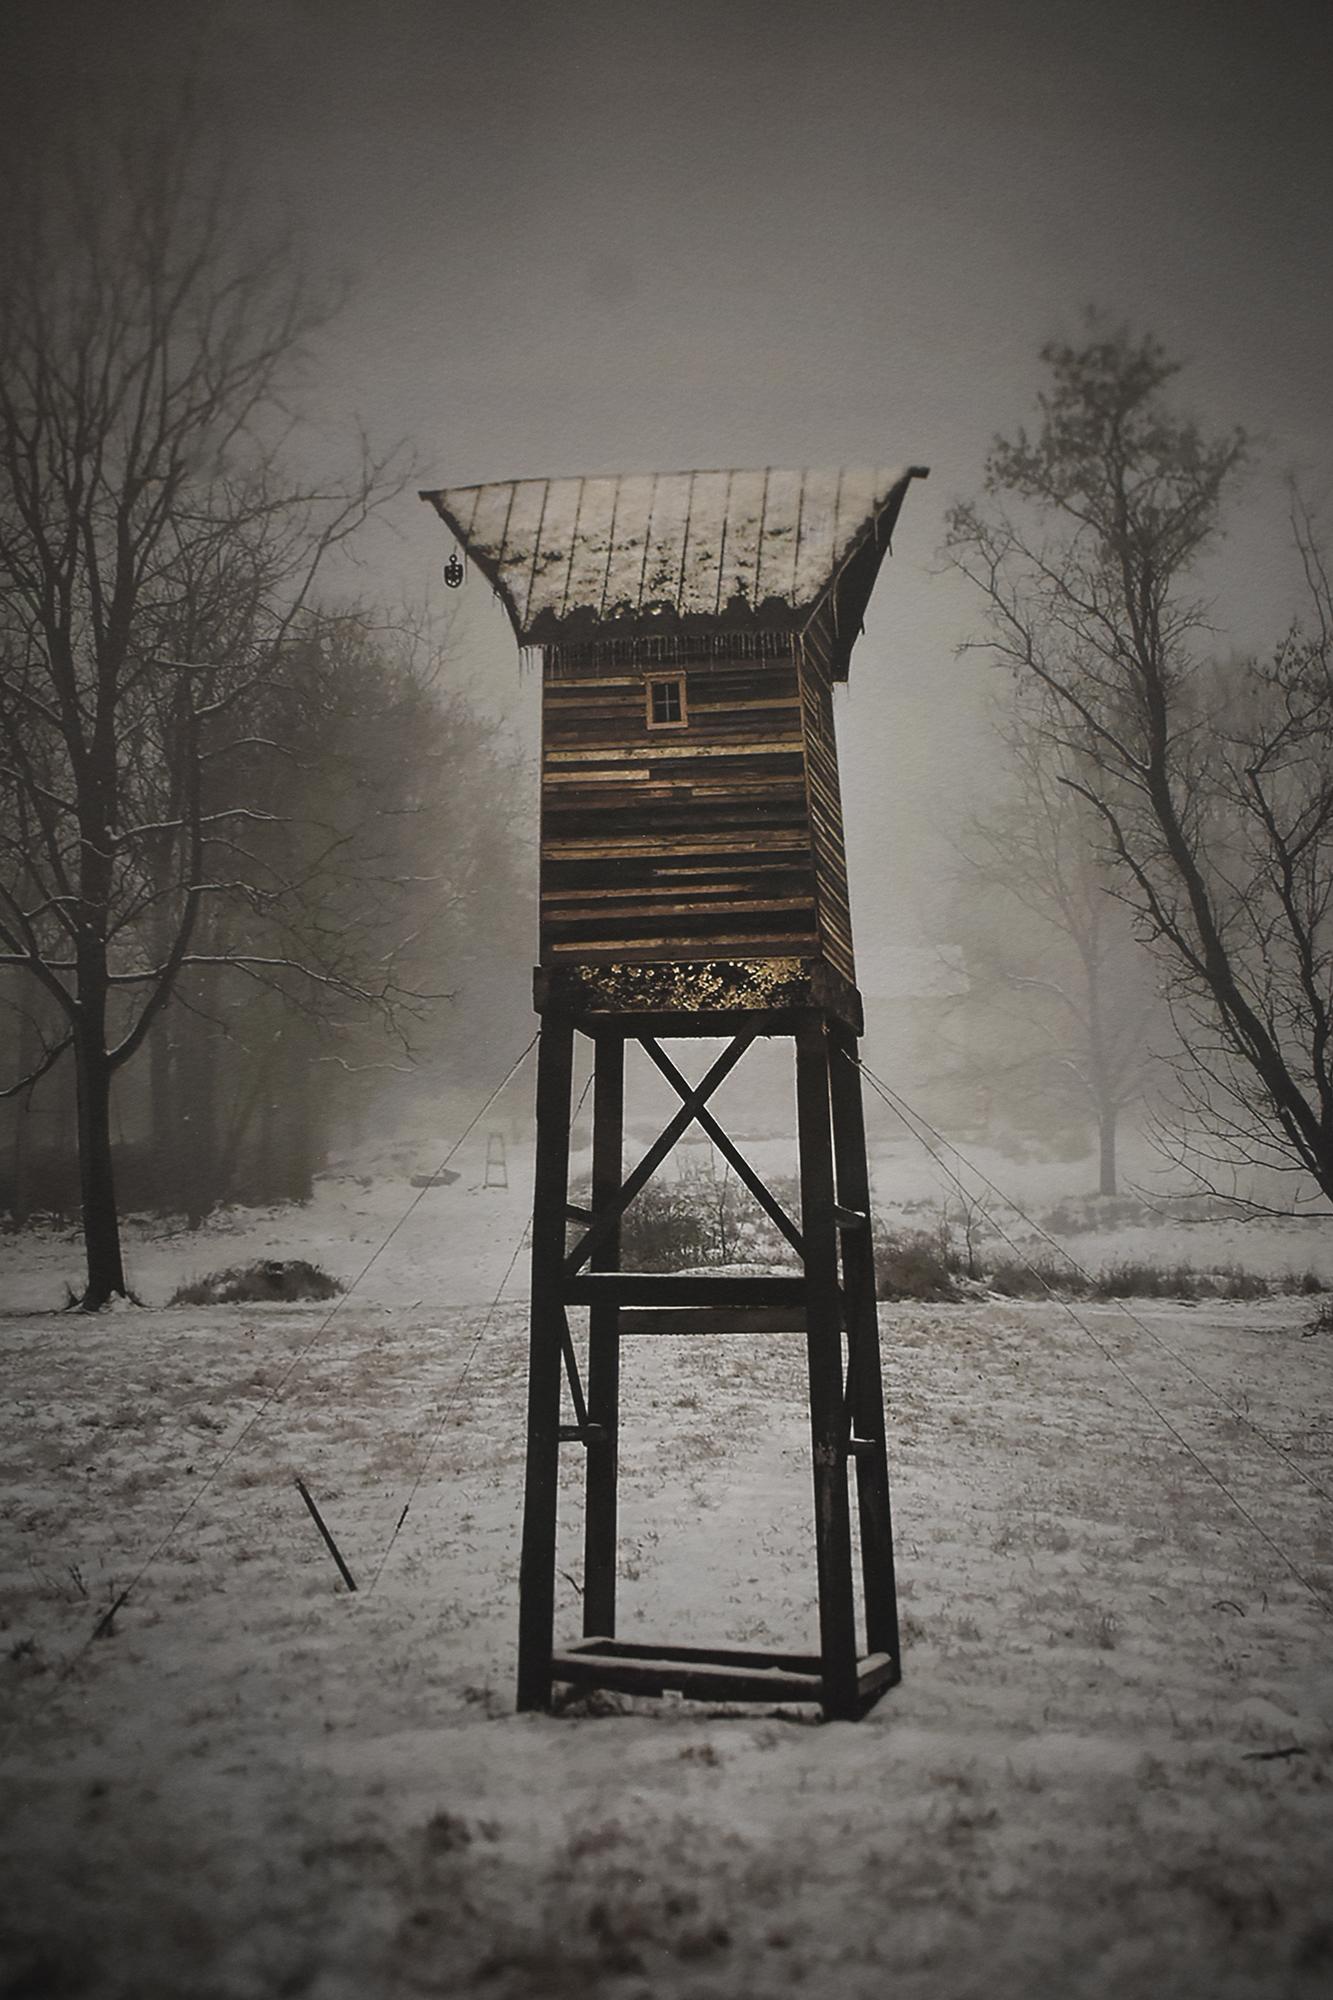 Watch Tower (Contemporary Black & White Landscape Photo of Structure in Woods) 2